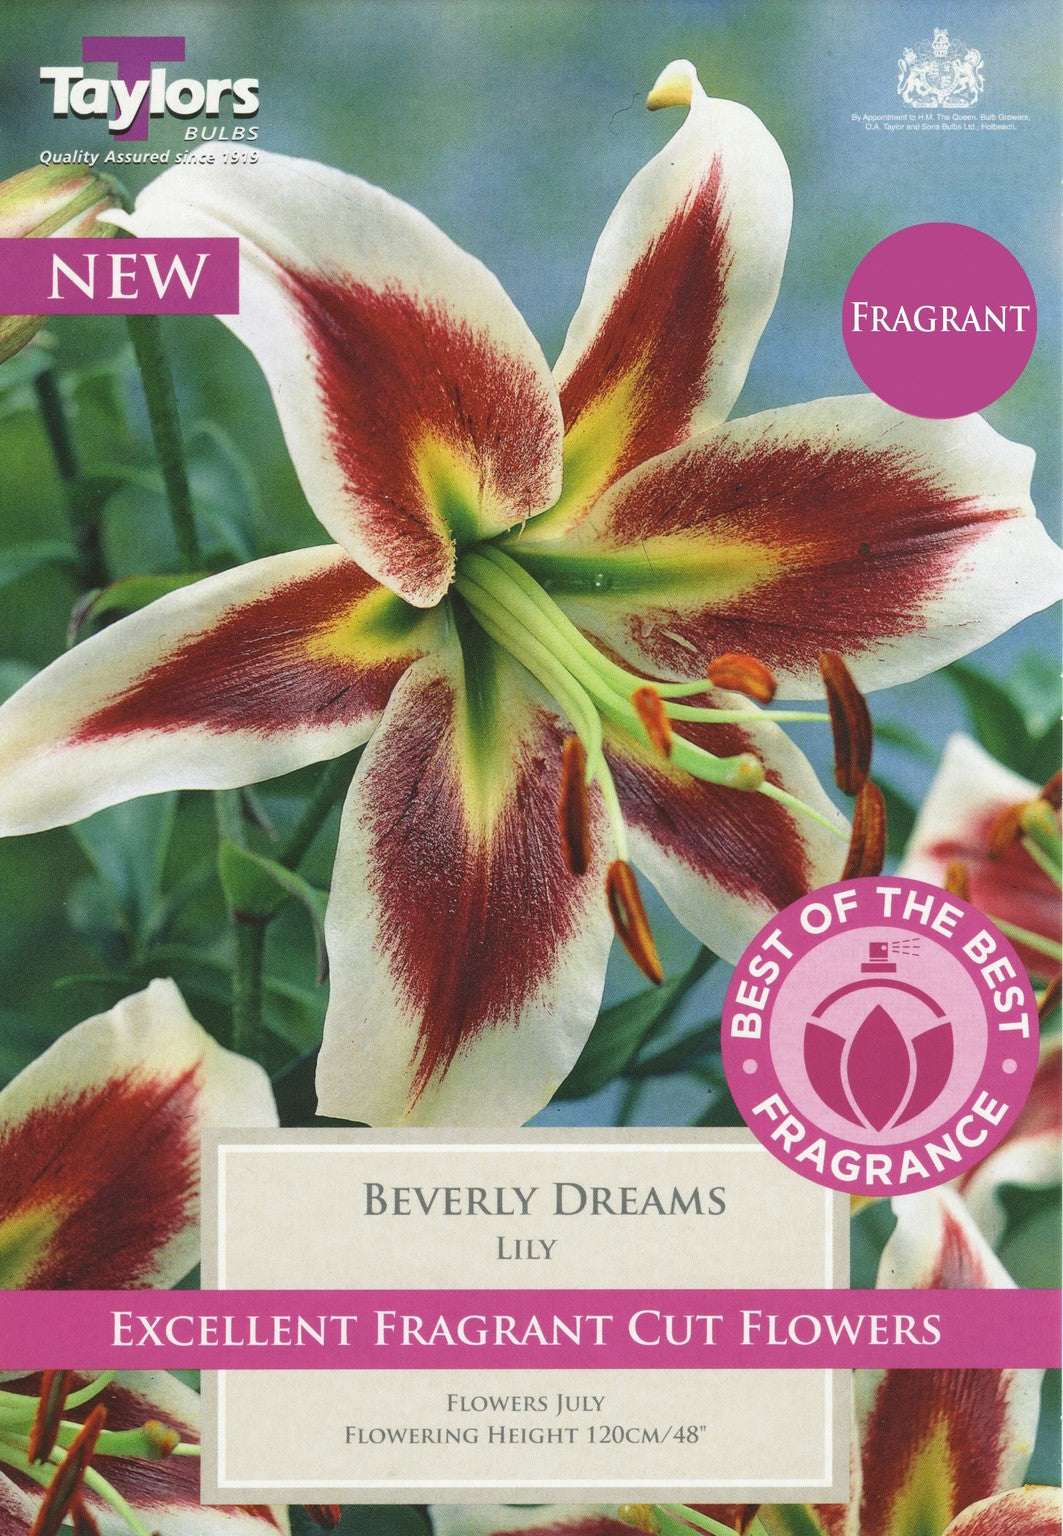 2 LILY BEVERLY DREAMS 18-20